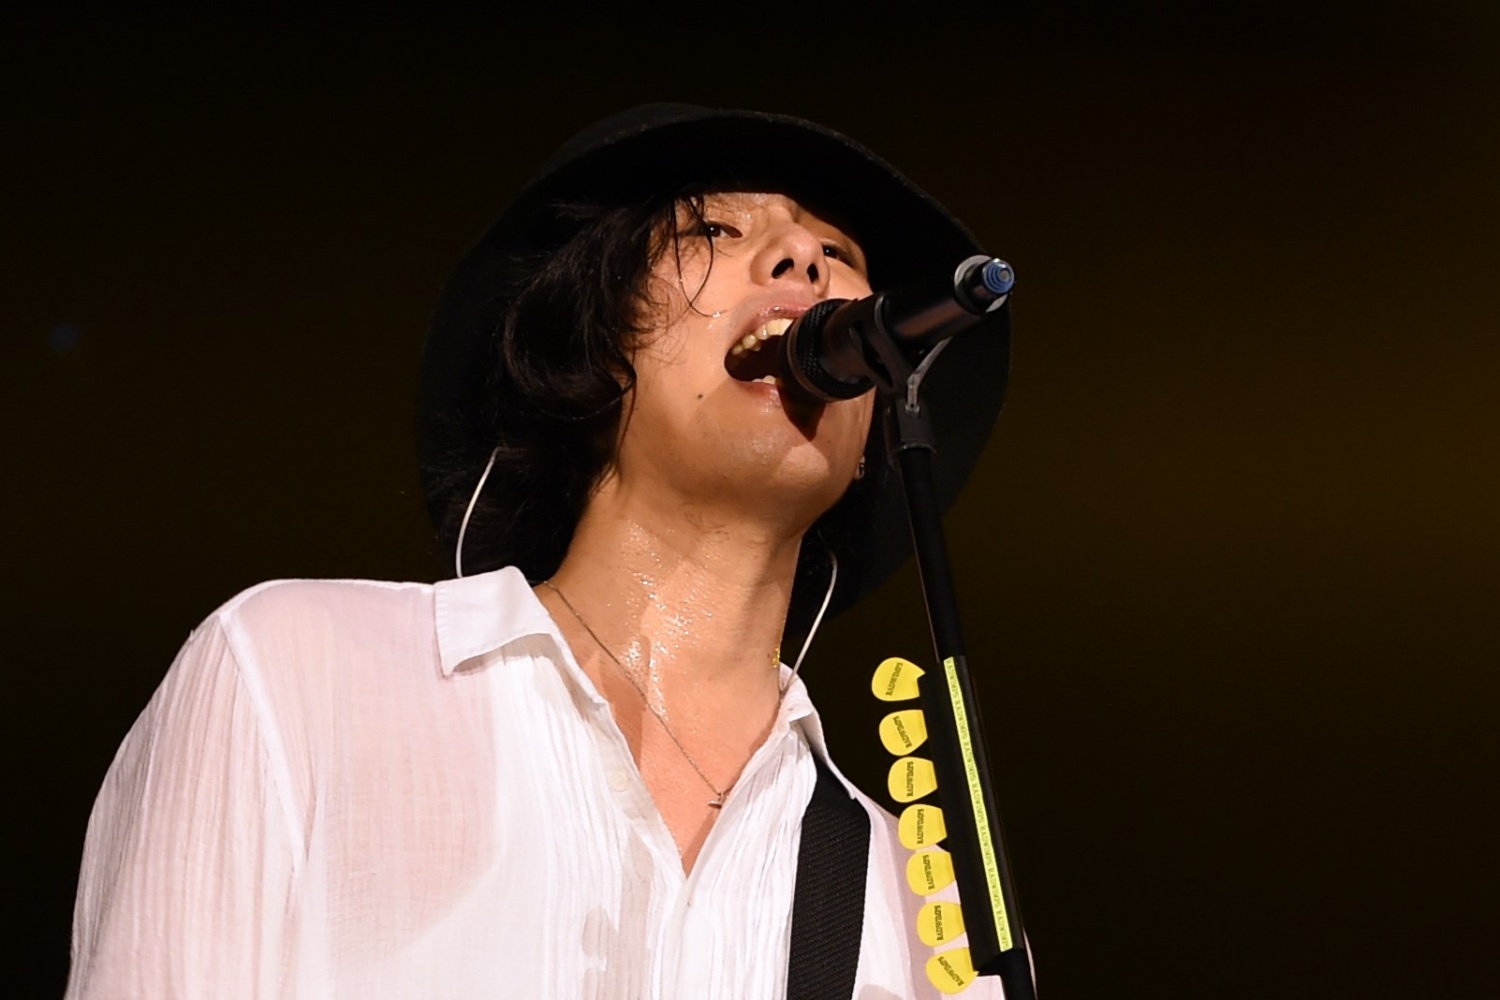 RADWIMPS Announces 2023 North American Tour: Dates, Venues. How To Get Tickets, & More